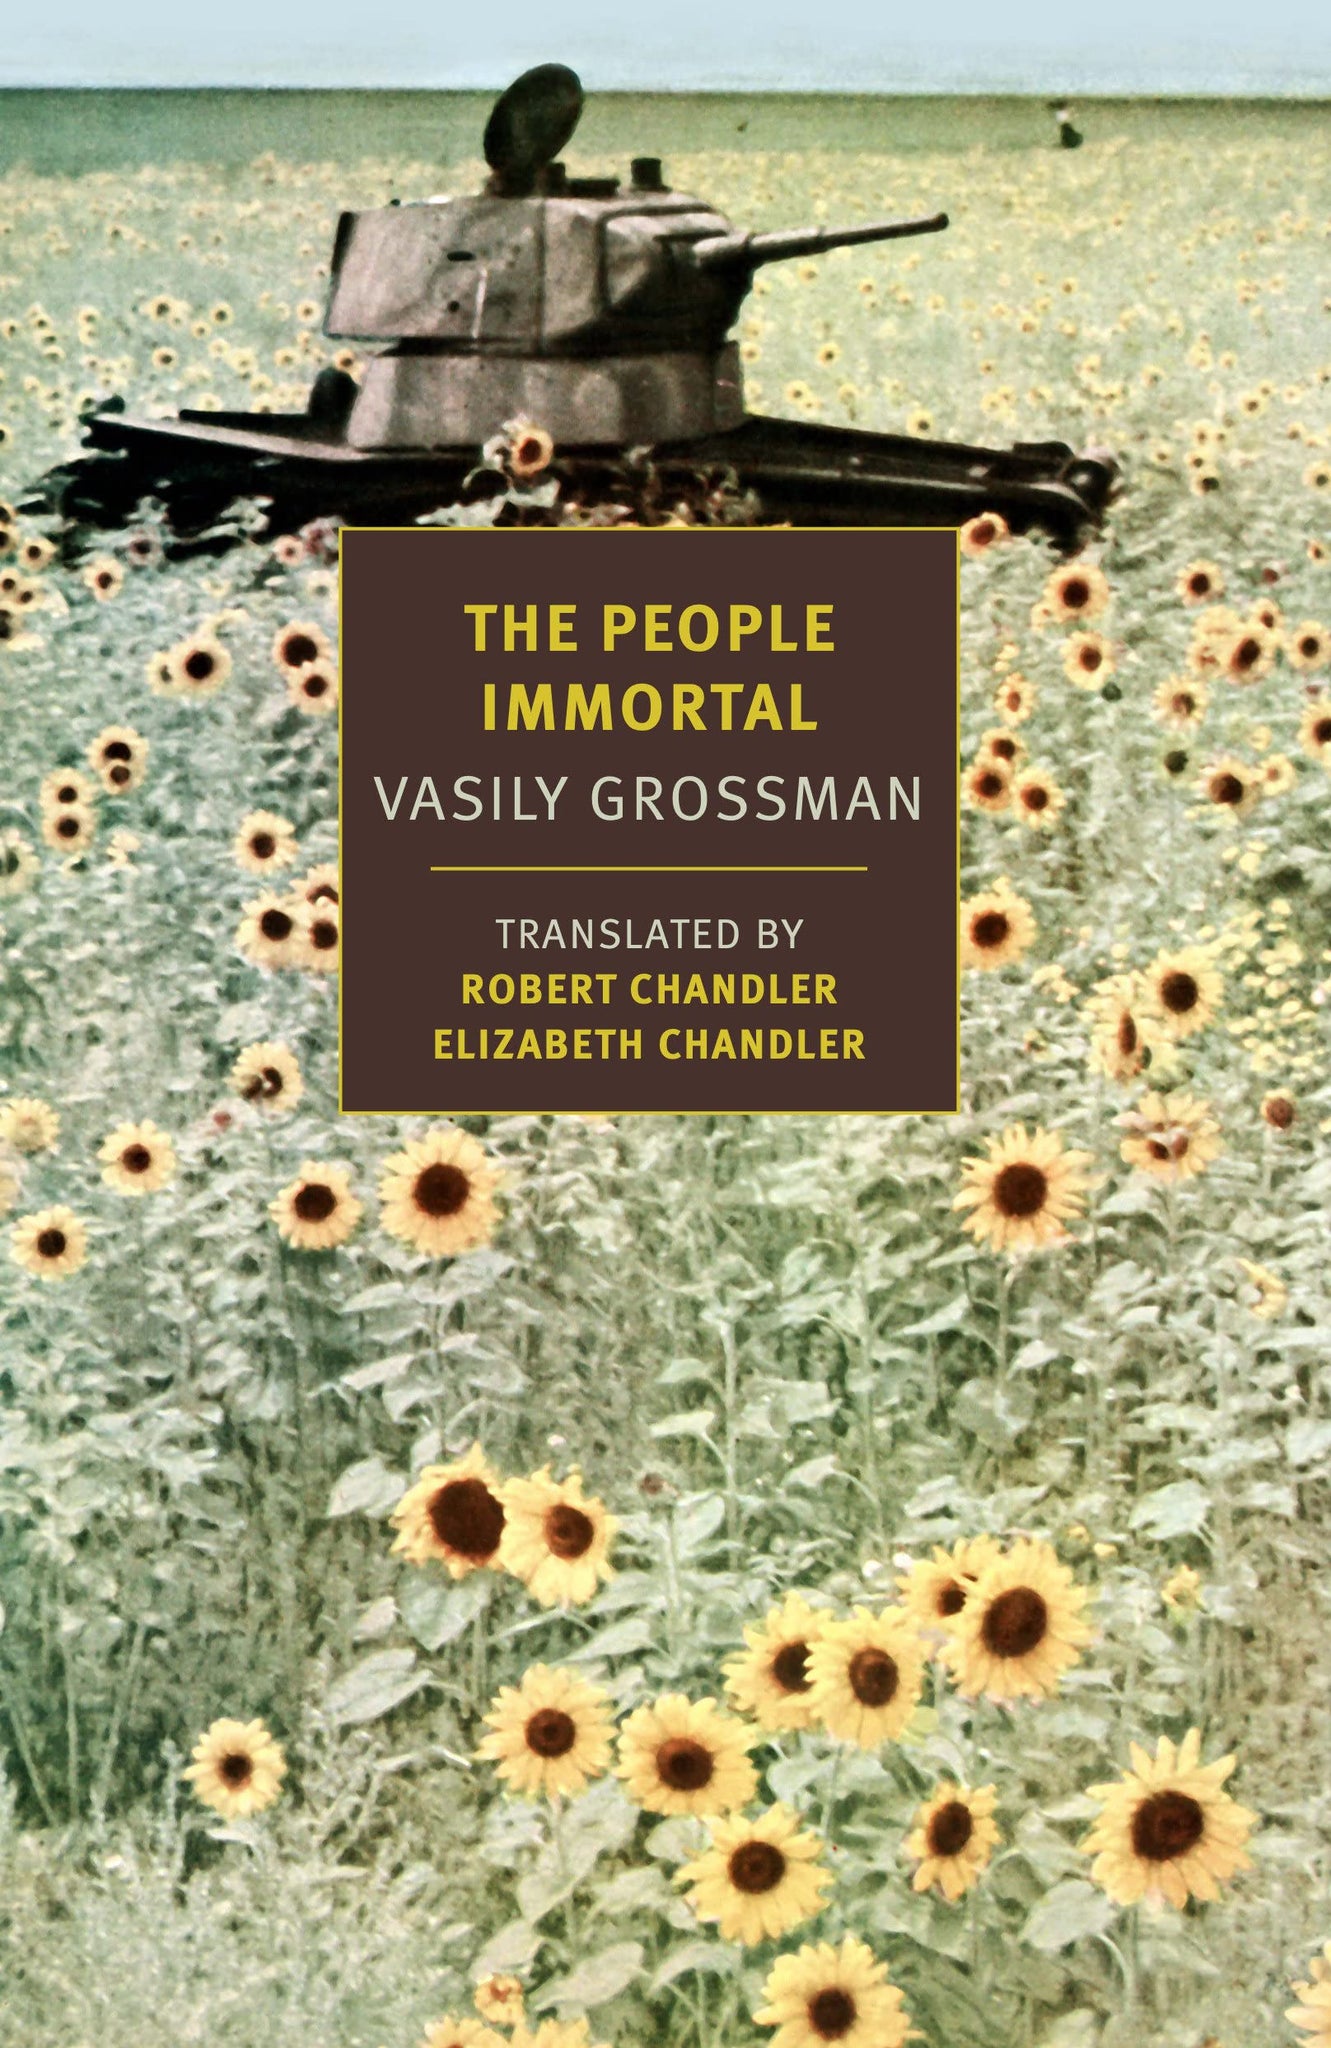 The People Immortal by Vasily Grossman